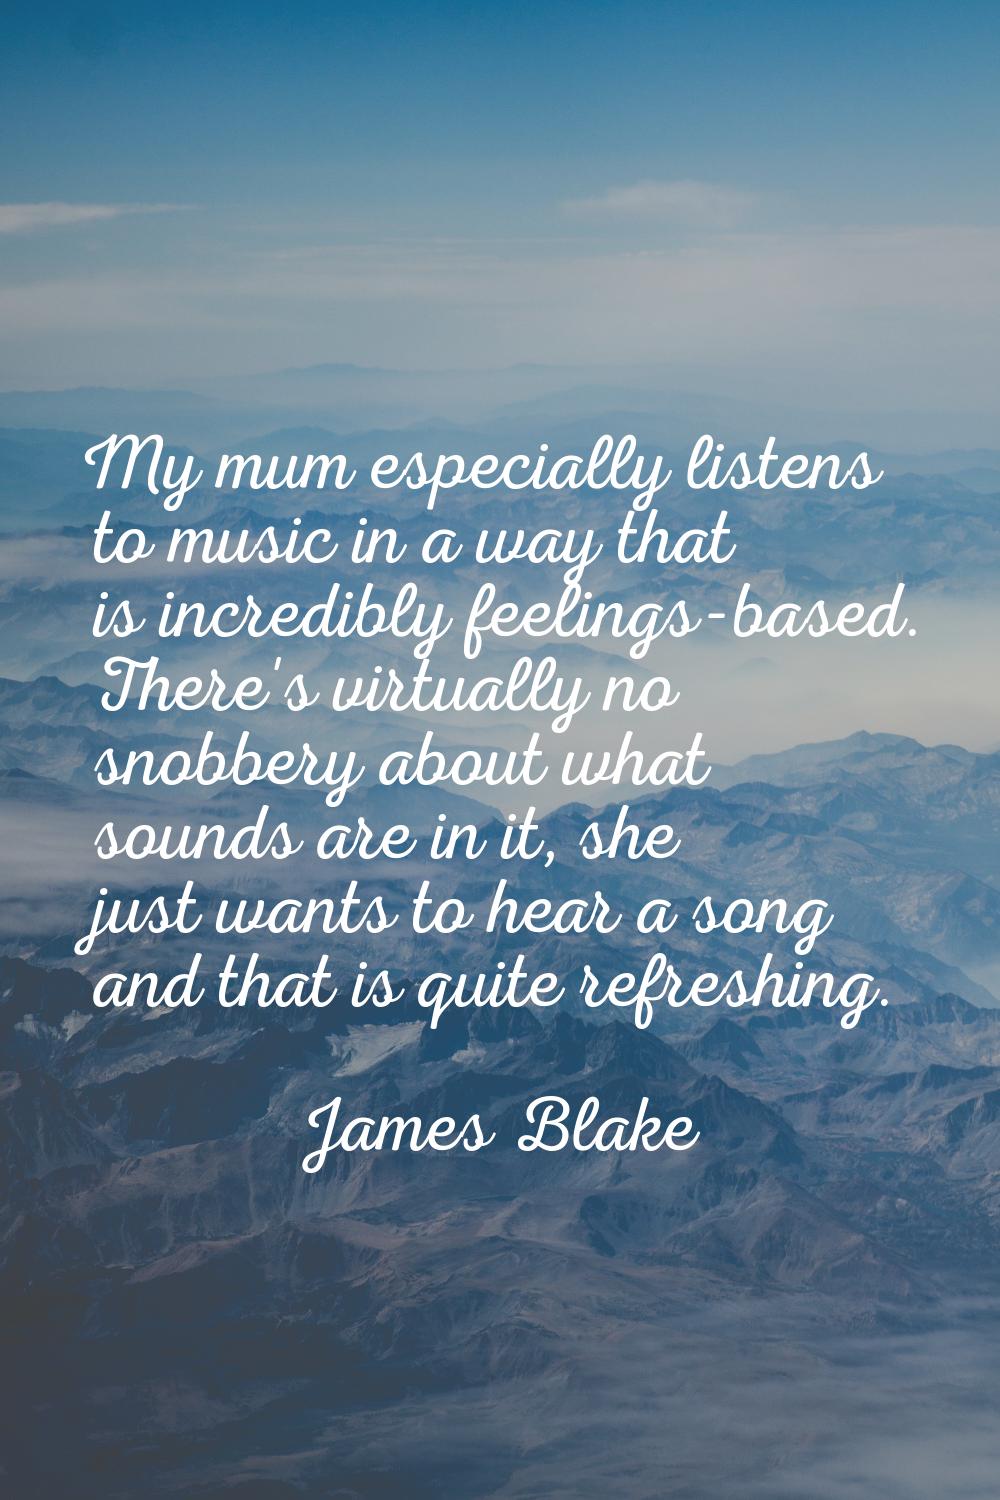 My mum especially listens to music in a way that is incredibly feelings-based. There's virtually no